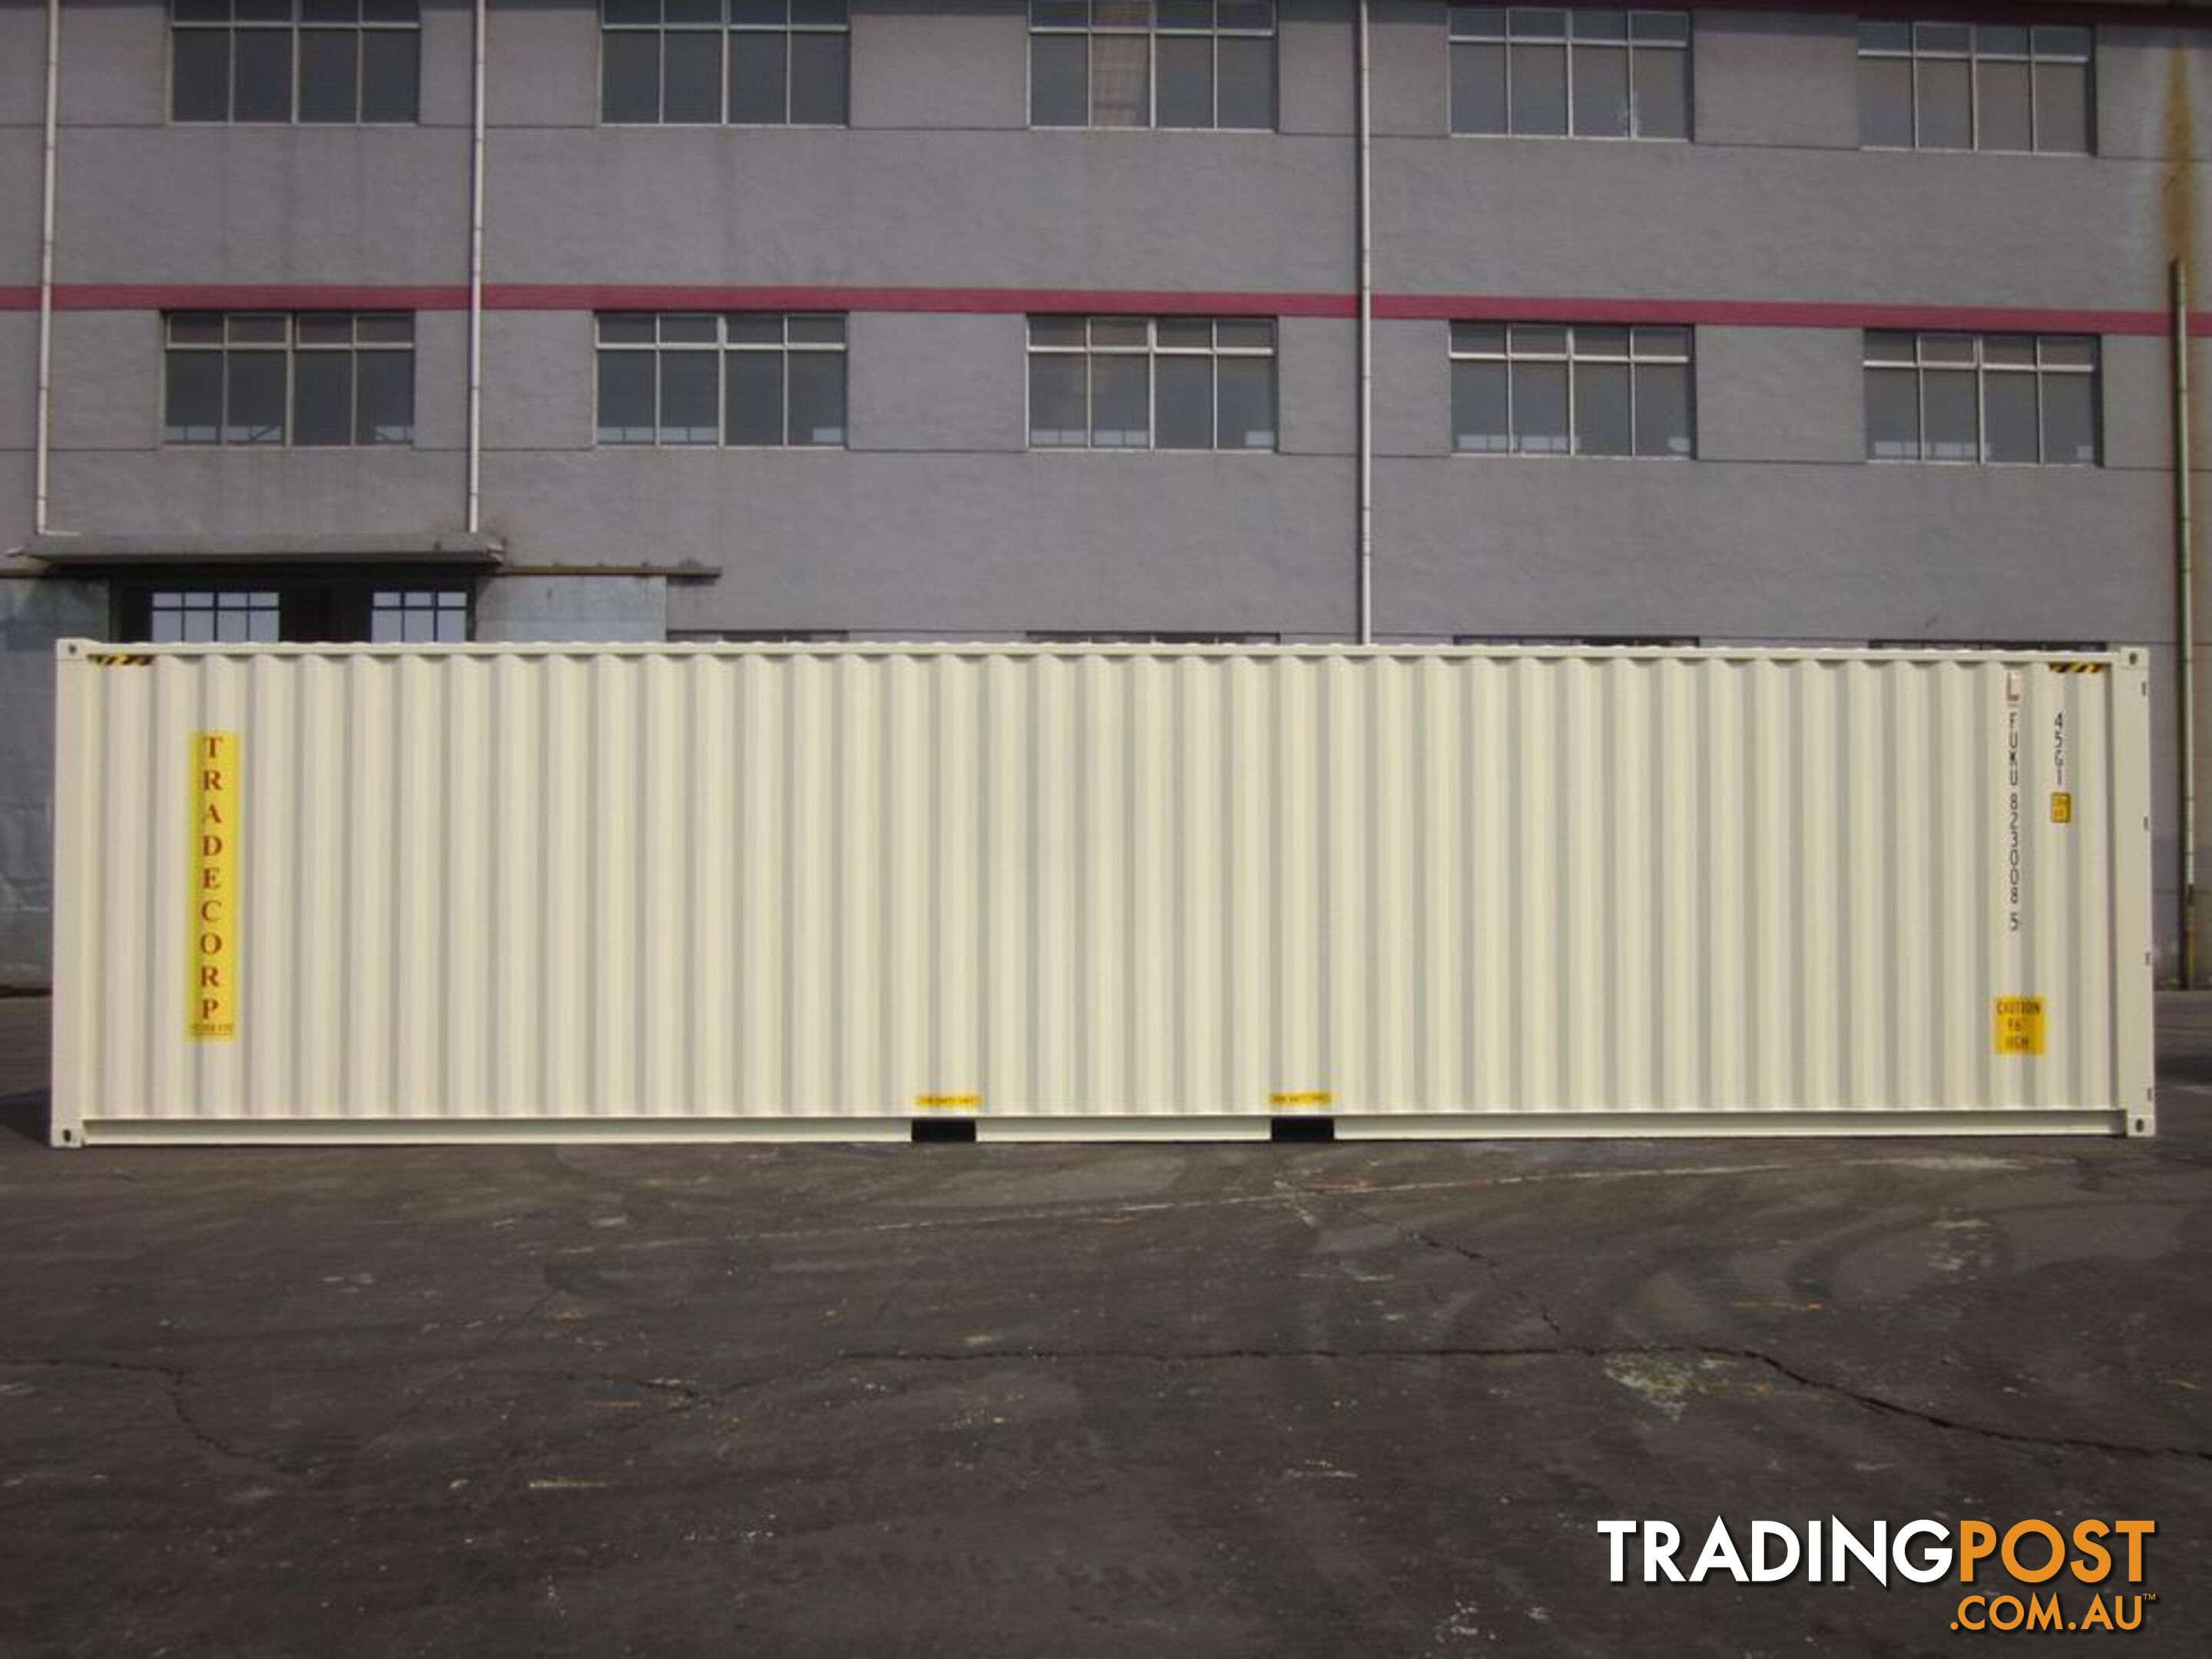 New 40ft High Cube Shipping Containers Gungahlin - From $8350 + GST